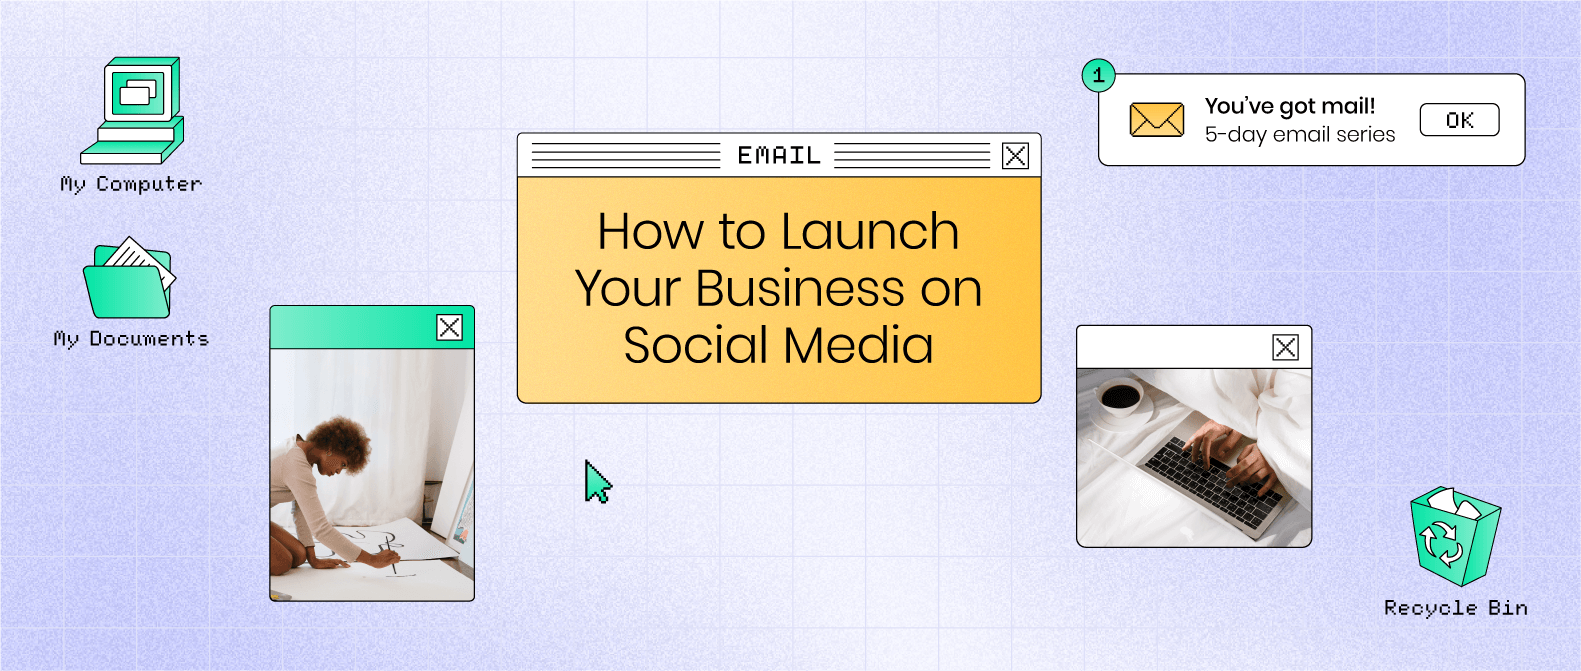 Decorative header, made to look like a computer desktop, reads How to Launch Your Business on Social Media